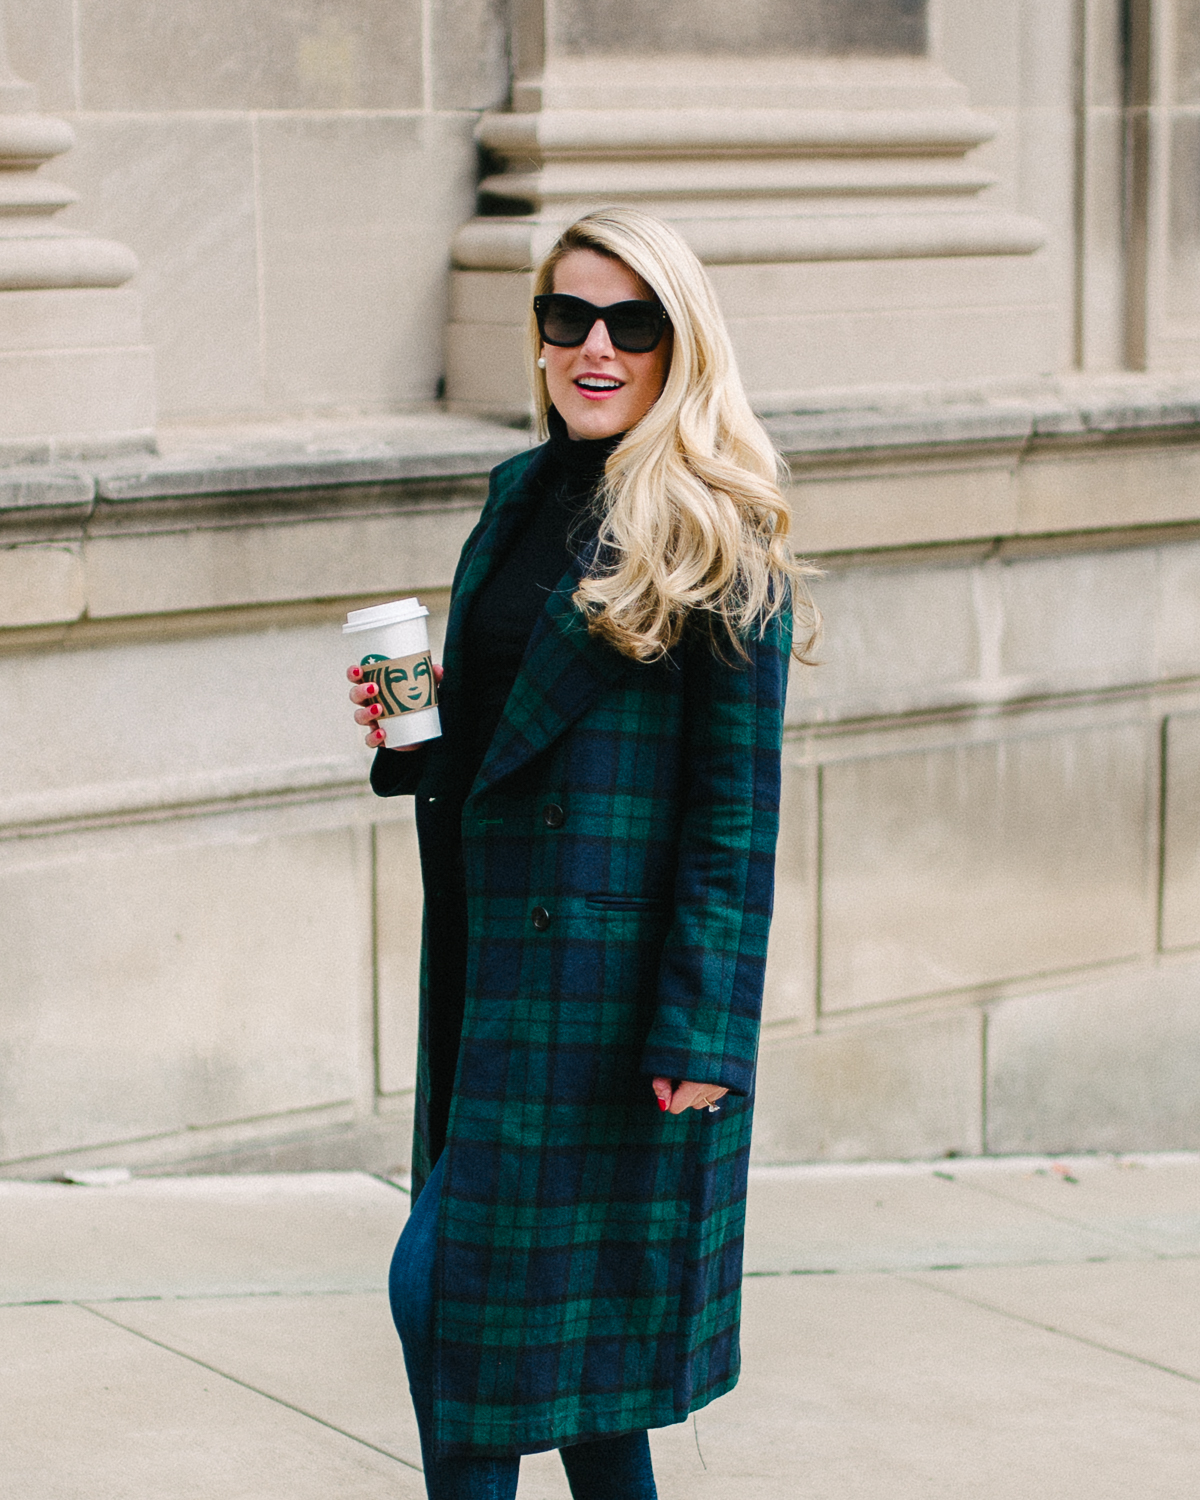 Summer Wind: Look For Less: Blackwatch Plaid Coat and More!